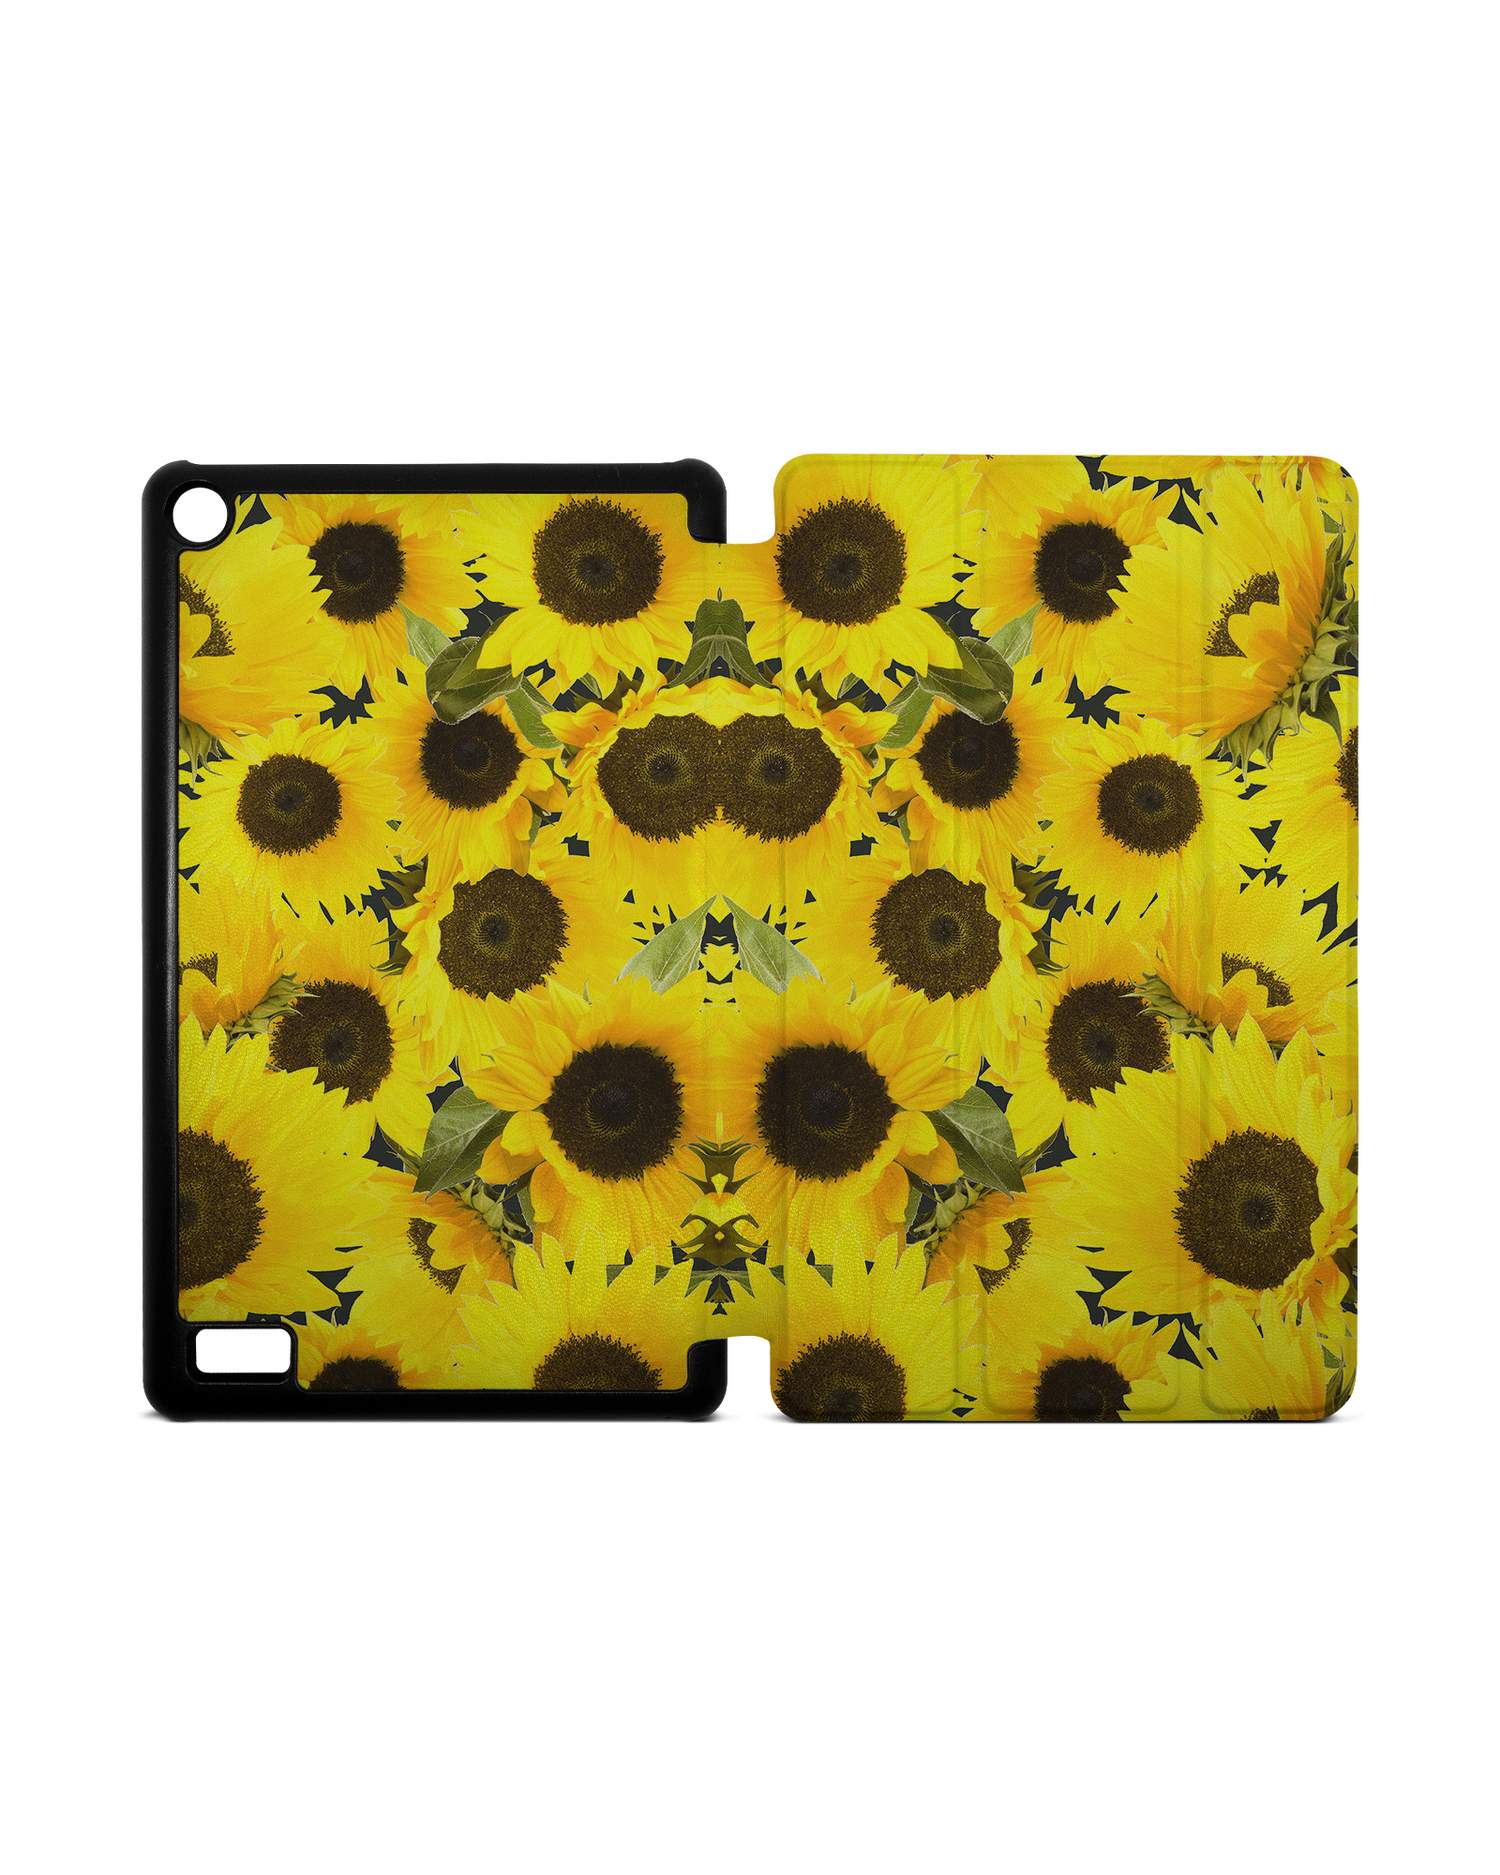 Sunflowers Tablet Smart Case for Amazon Fire 7: Opened